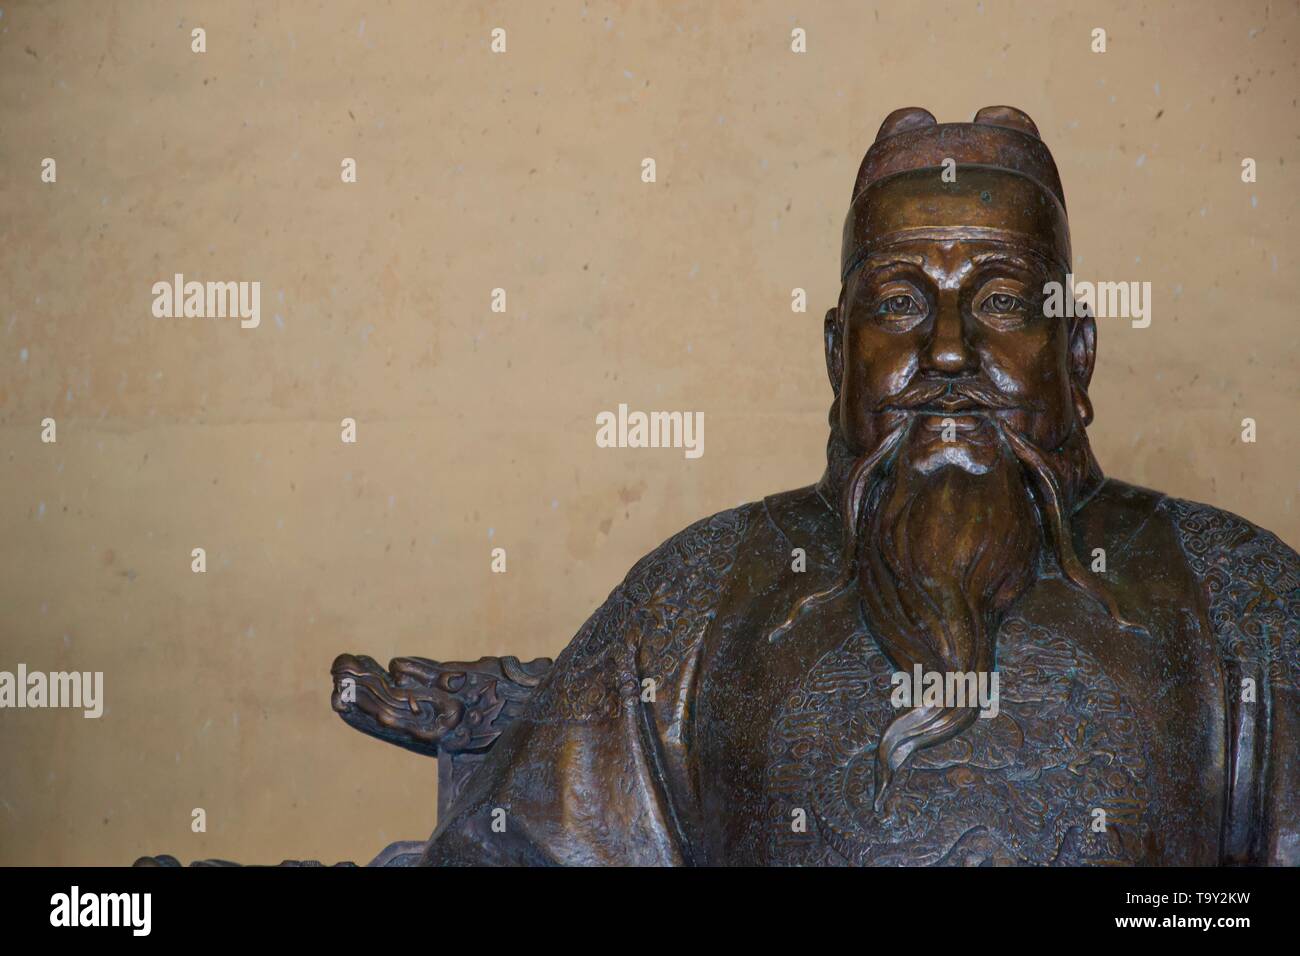 Statue of sad tired old Chinese man with big eyes, a whispy beard, ornately embroidered shirt and a hat that looks like a Lego brick. Made from a gold Stock Photo